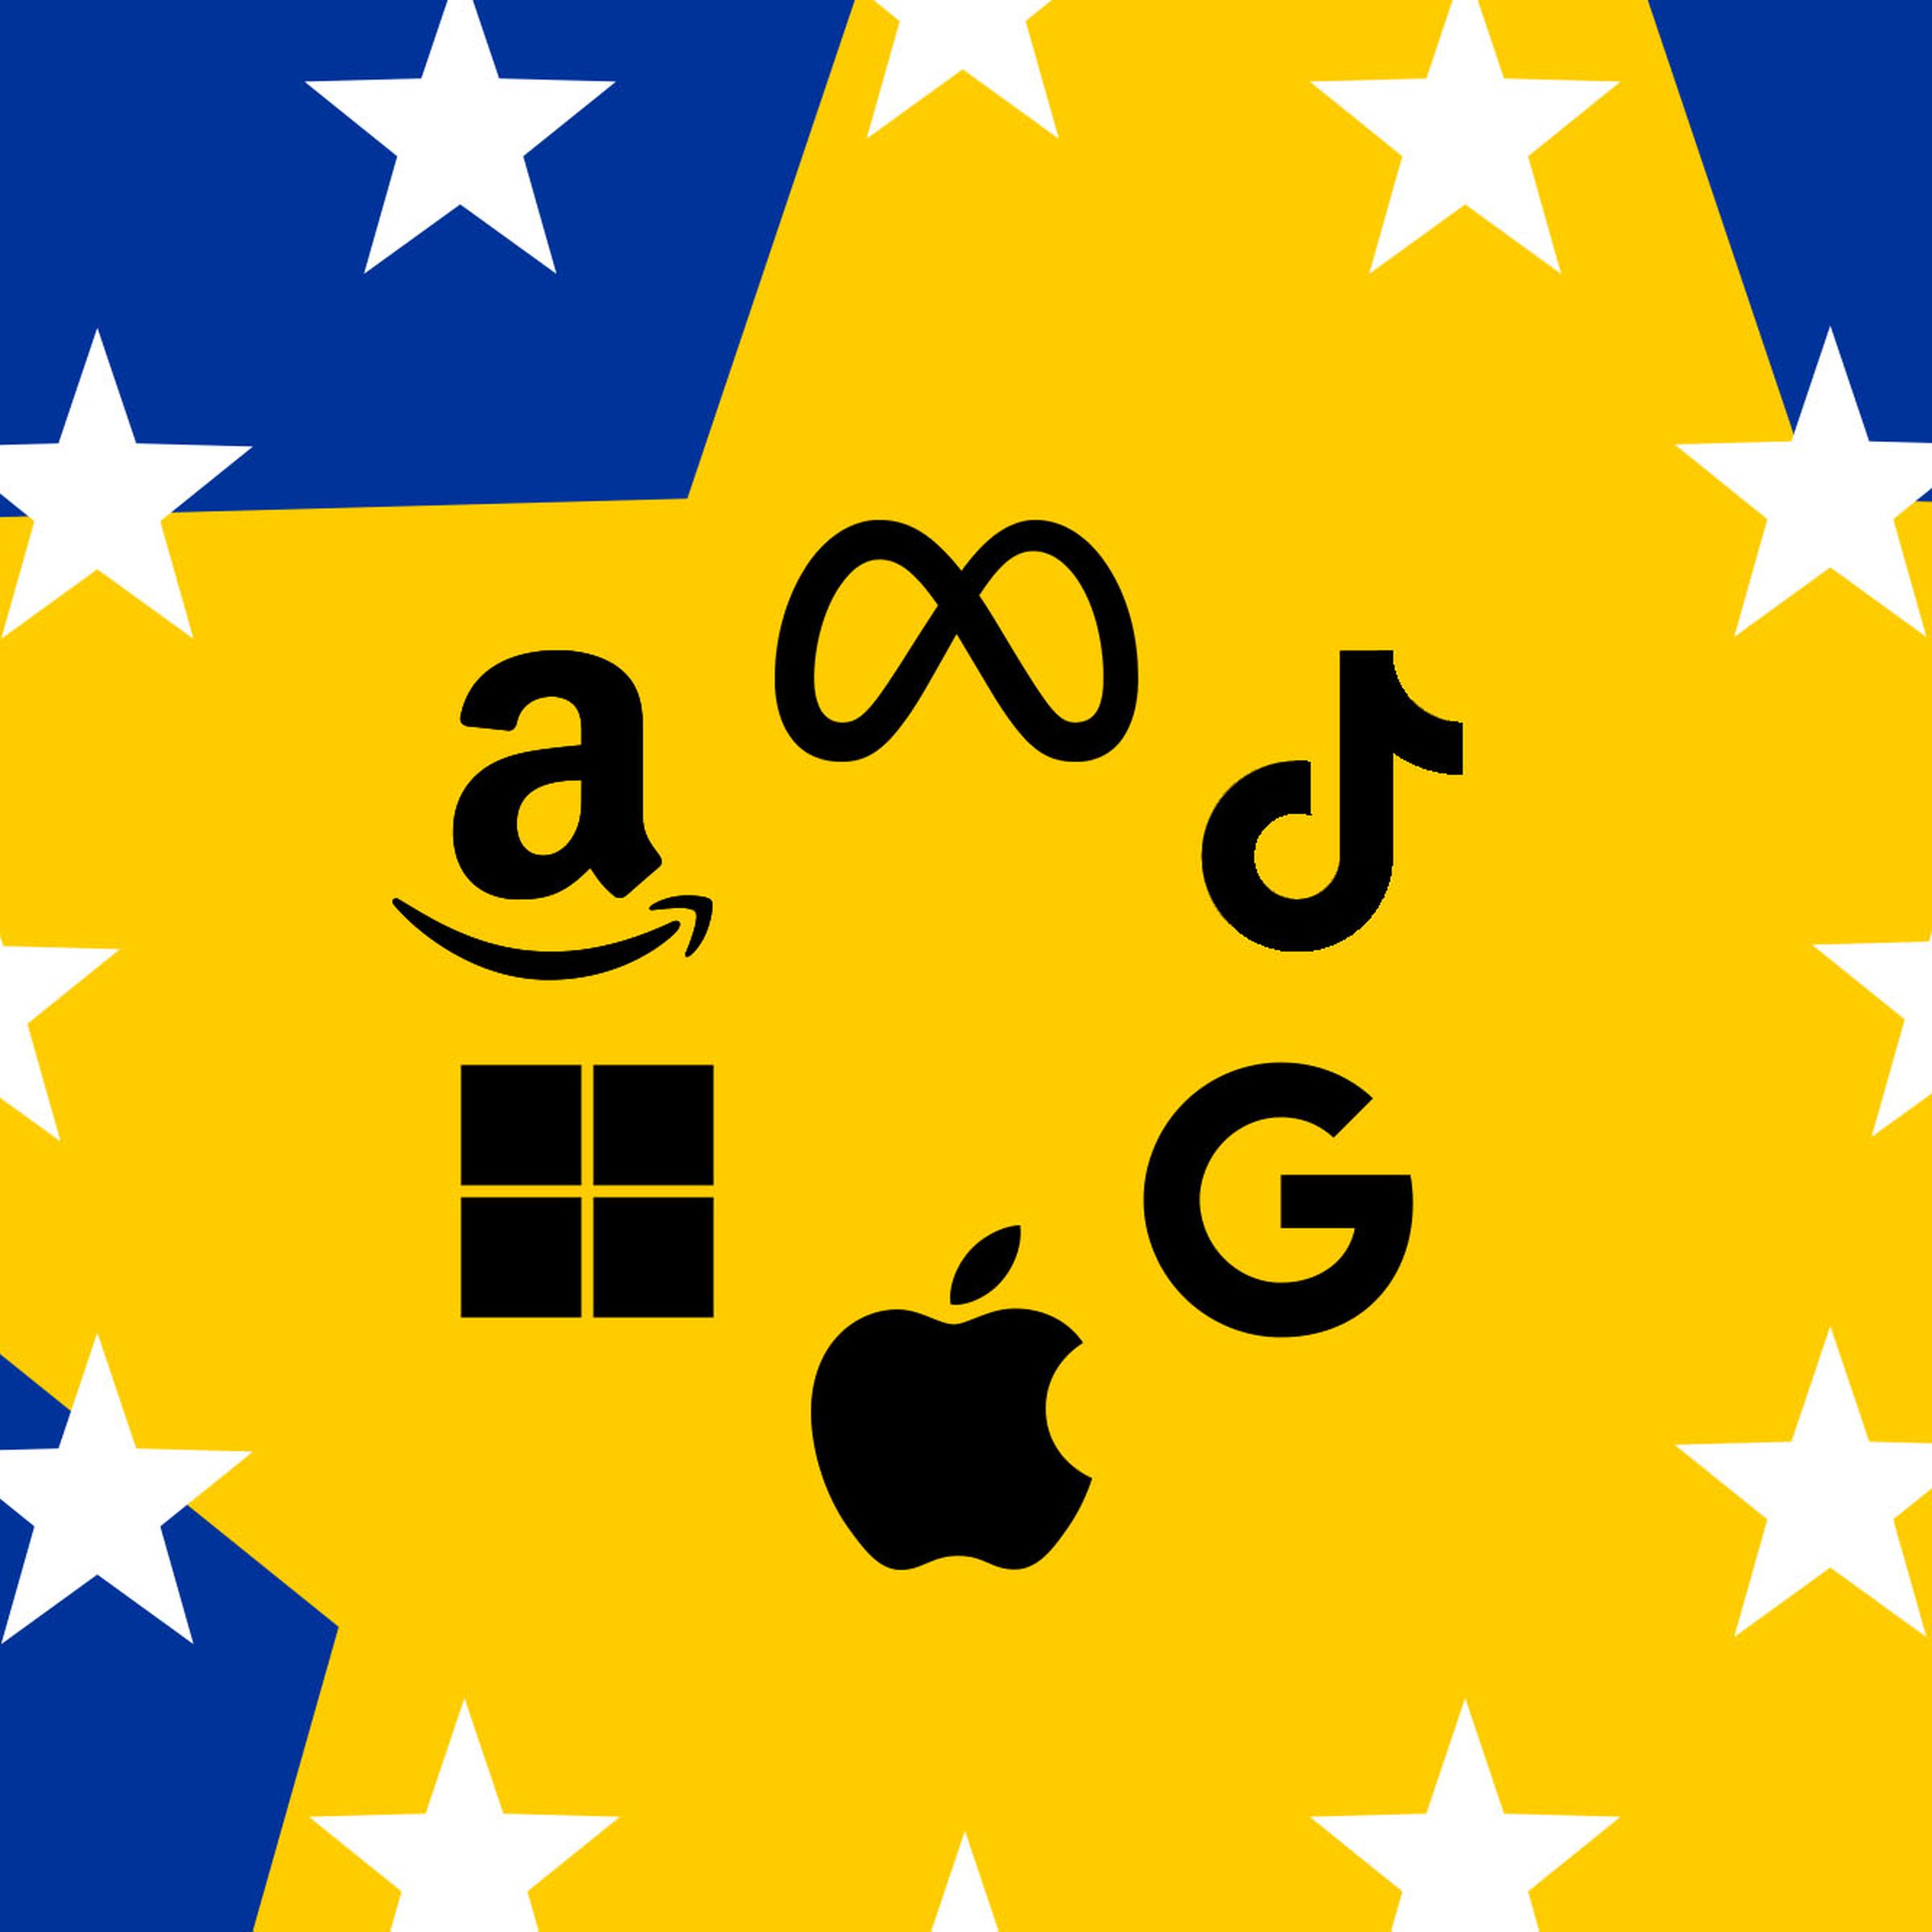 Logos of various big tech companies with aspects of the EU flag.